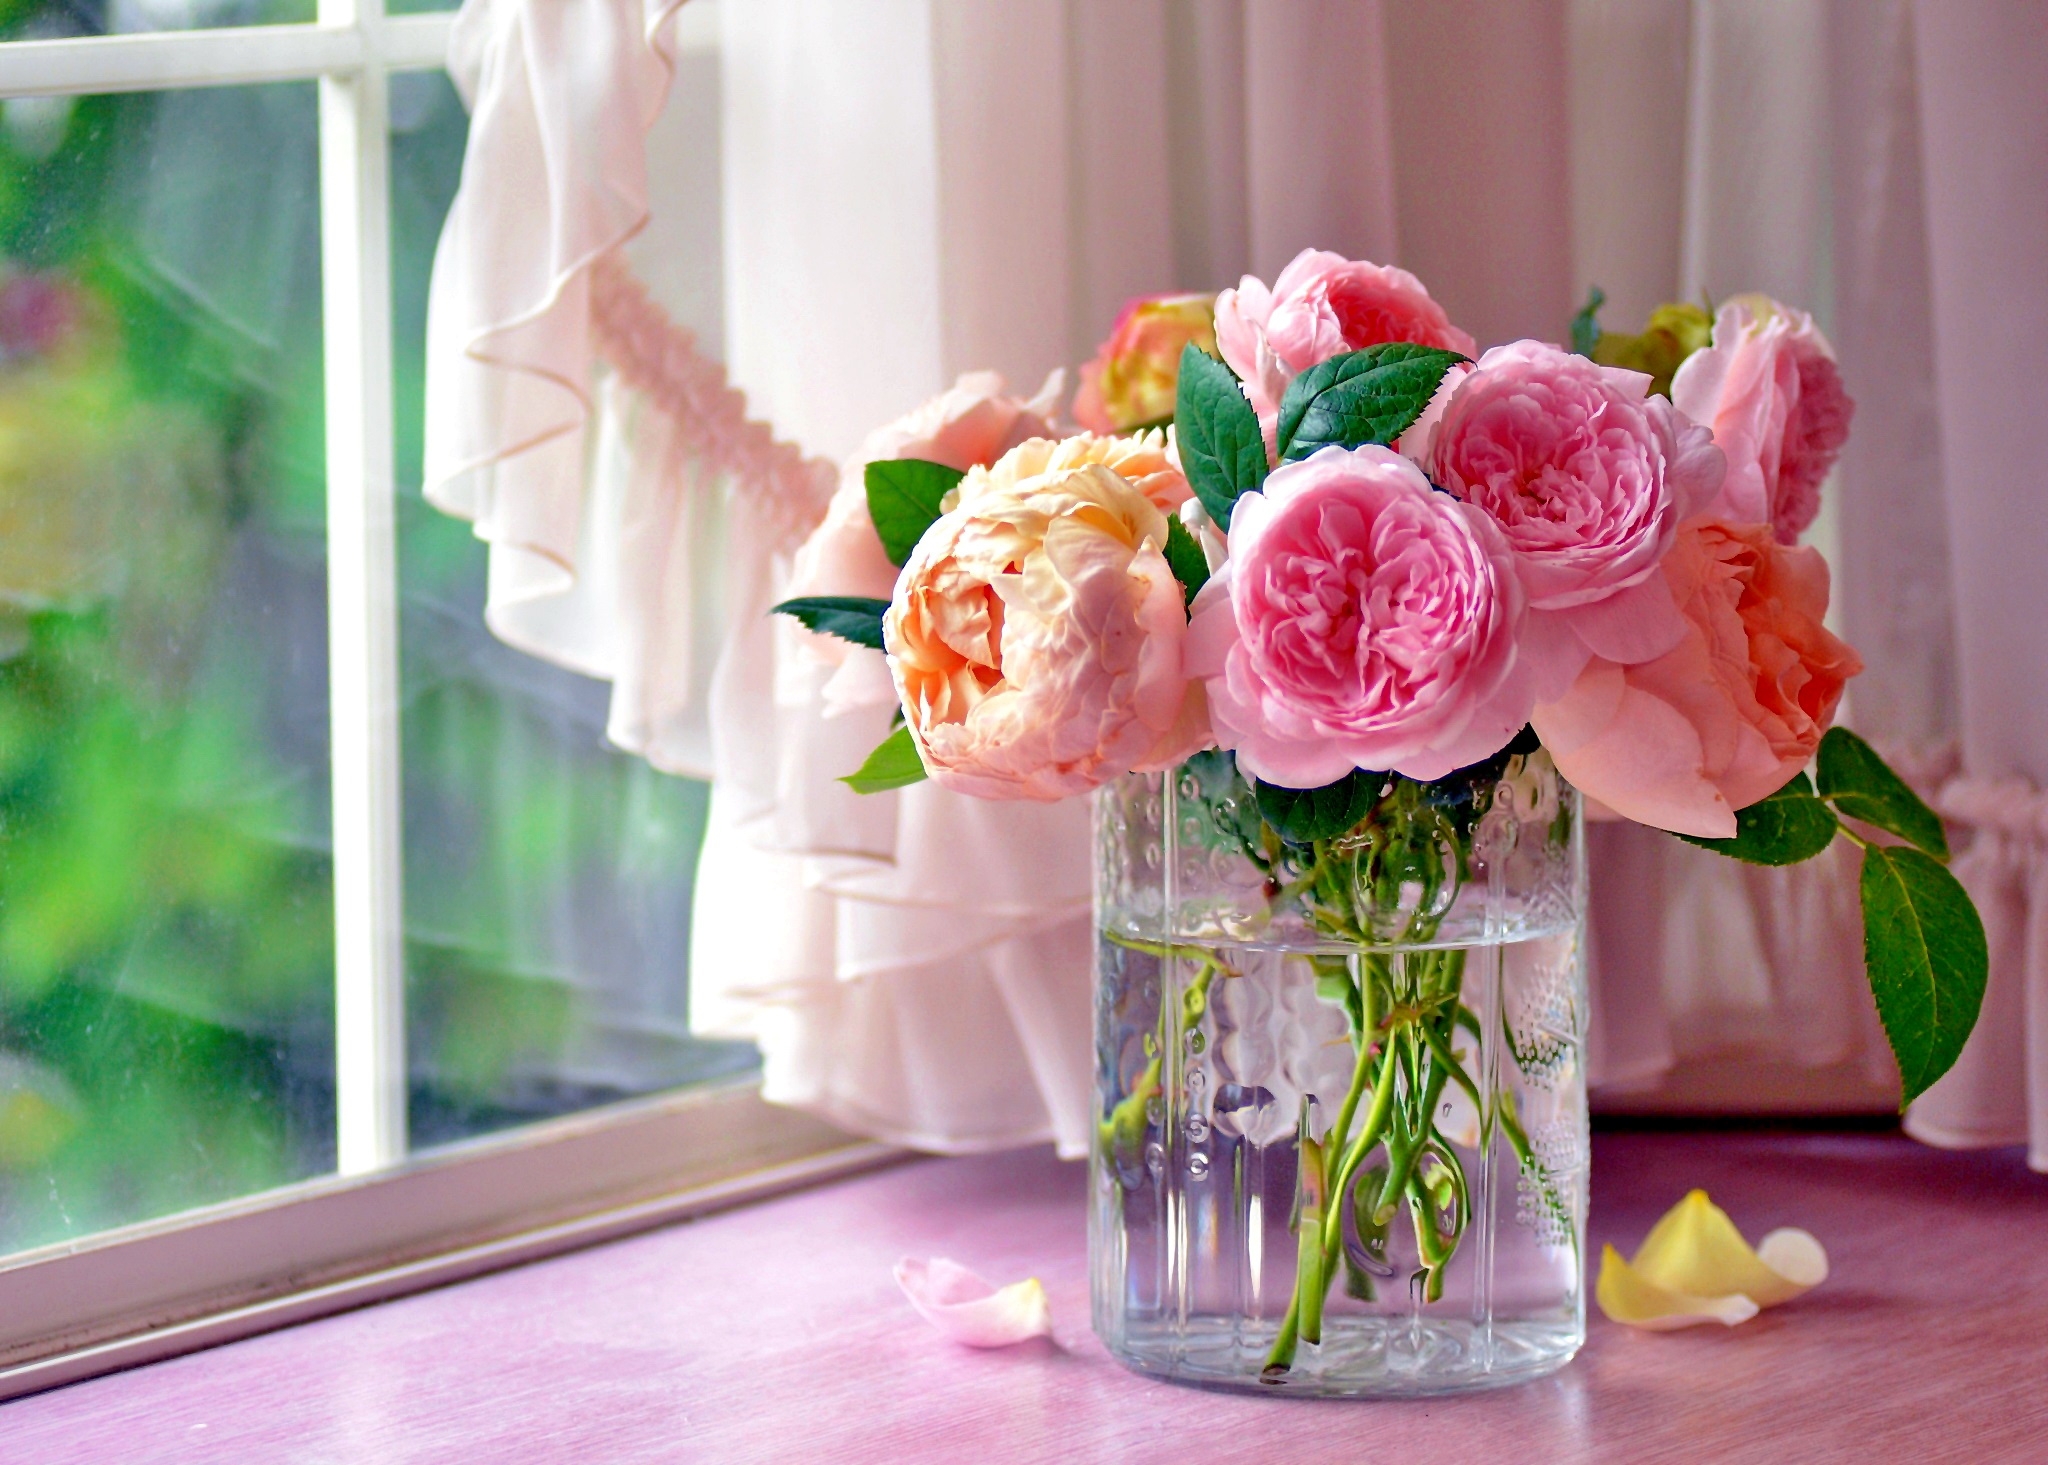 Pastel-Colored Cabbage Roses in Vase by the Window